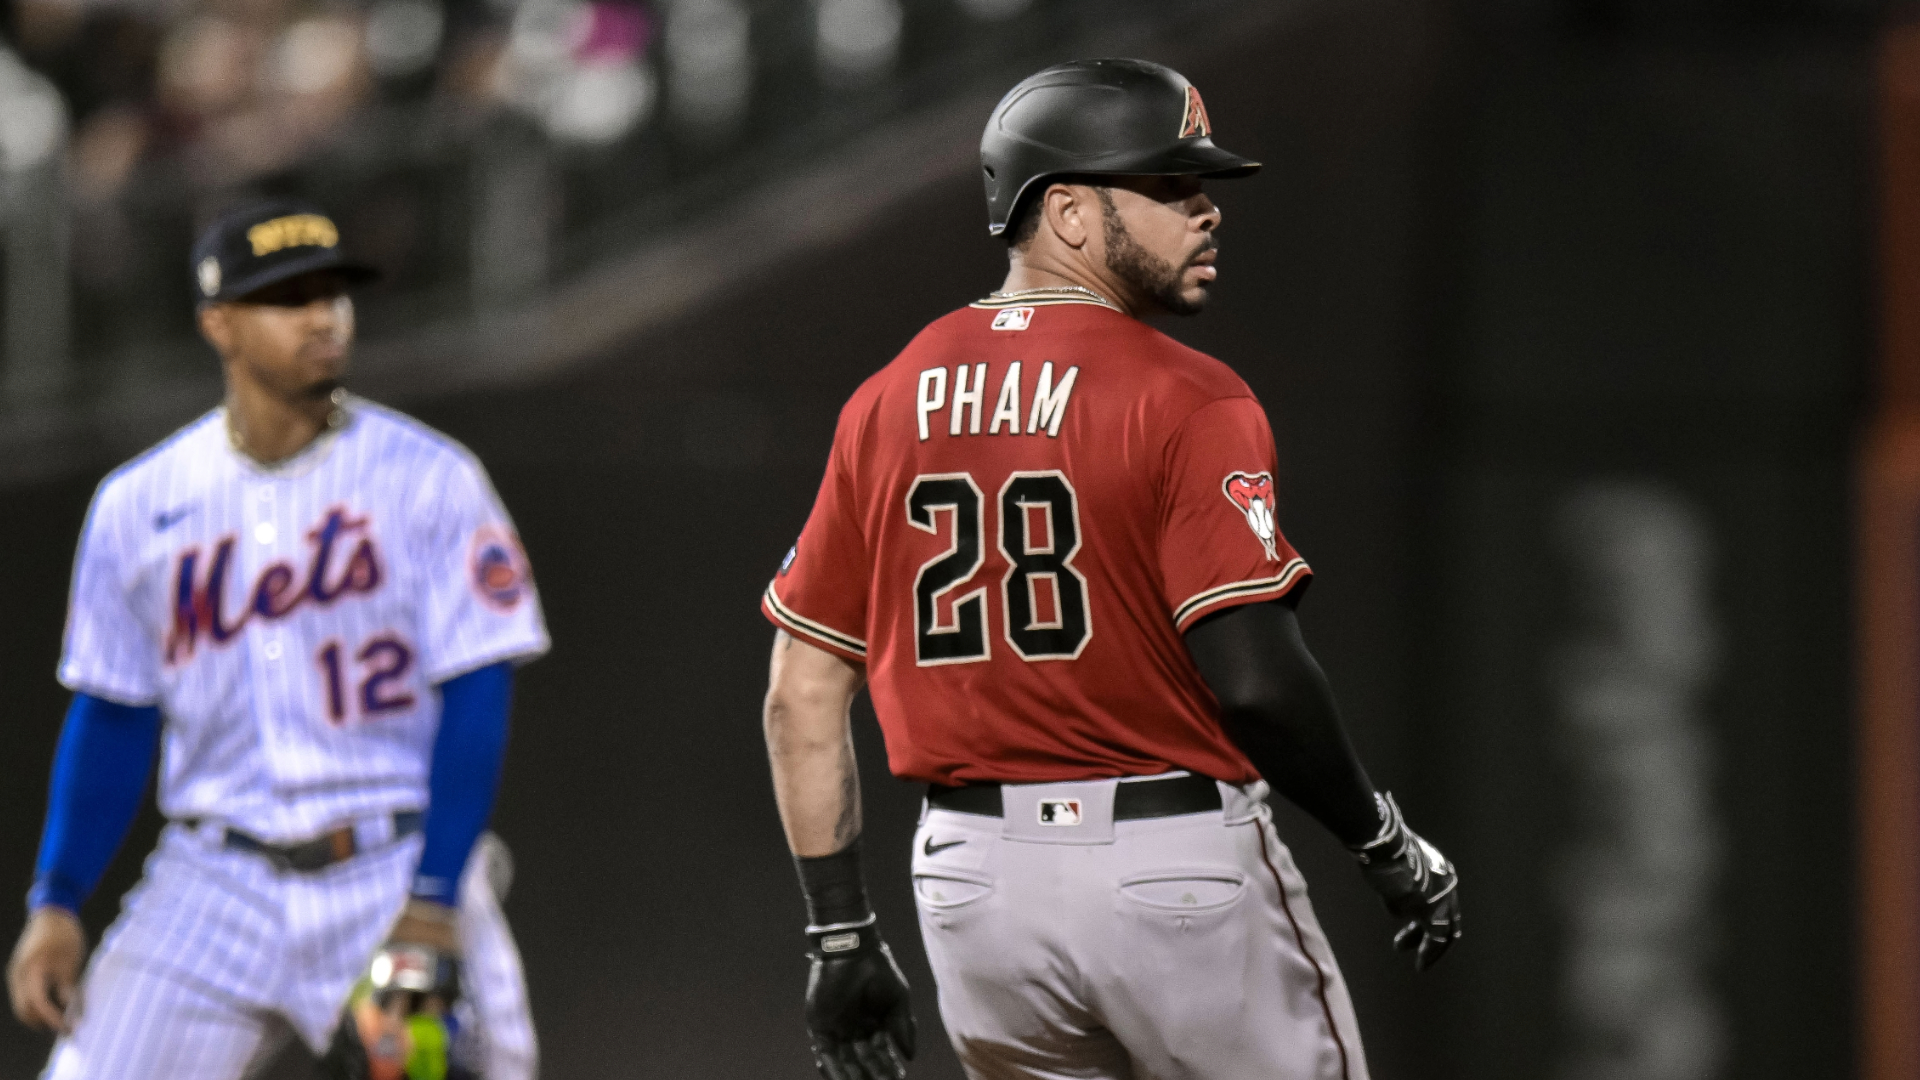 Cincinnati Reds trade targets - Tampa Bay Rays OF Tommy Pham - Red